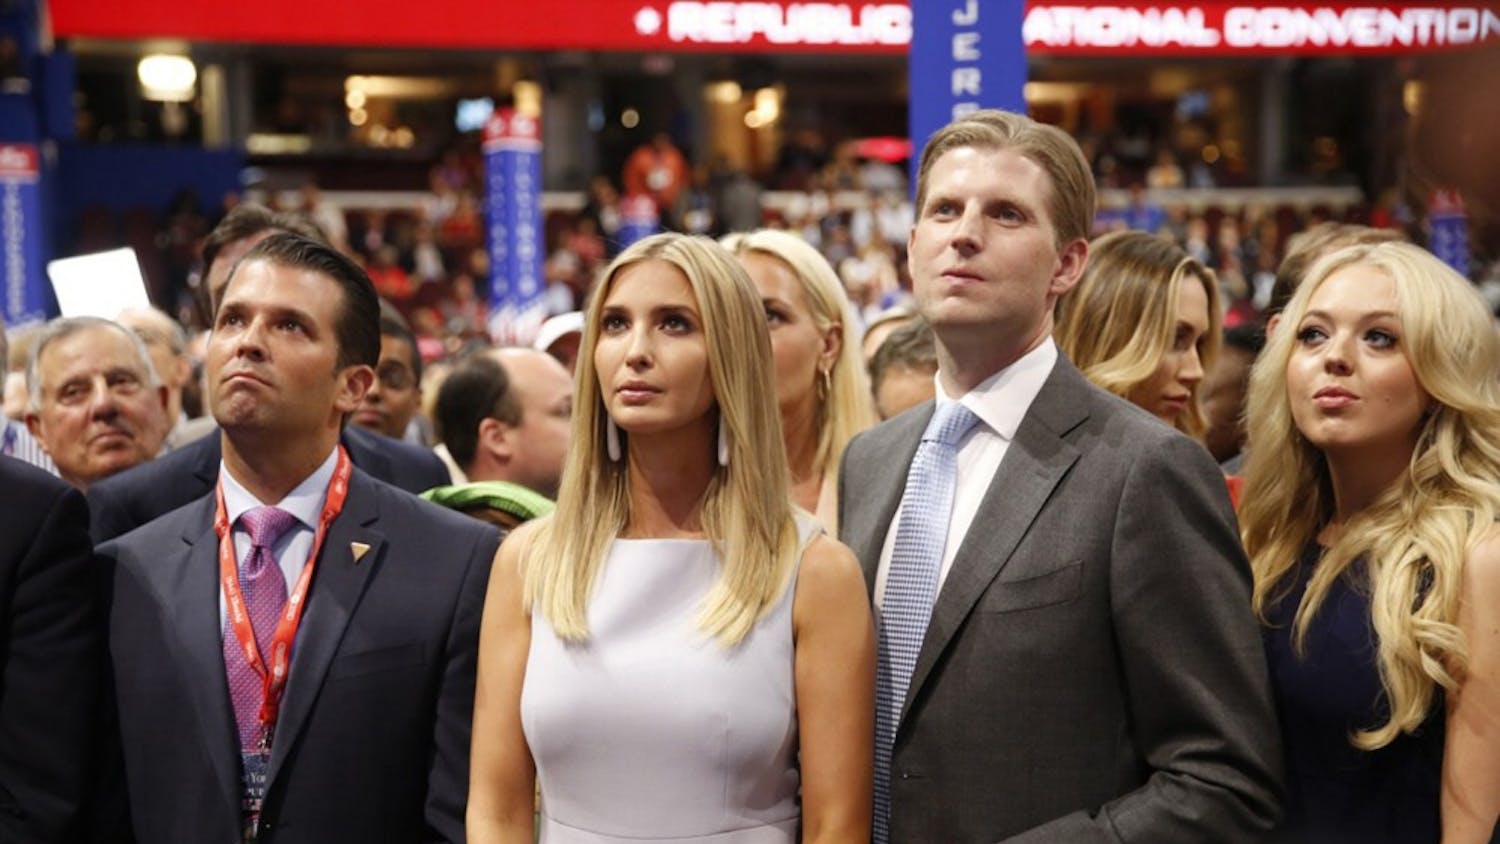 From left, Donald Trump Jr., Ivanka Trump, Eric Trump and Tiffany Trump, take part in the roll call vote putting their father, Republican presidential candidate Donald Trump, over the top on the second day of the Republican National Convention on Tuesday, July 19, 2016, at Quicken Loans Arena in Cleveland. (Brian van der Brug/Los Angeles Times/TNS) 